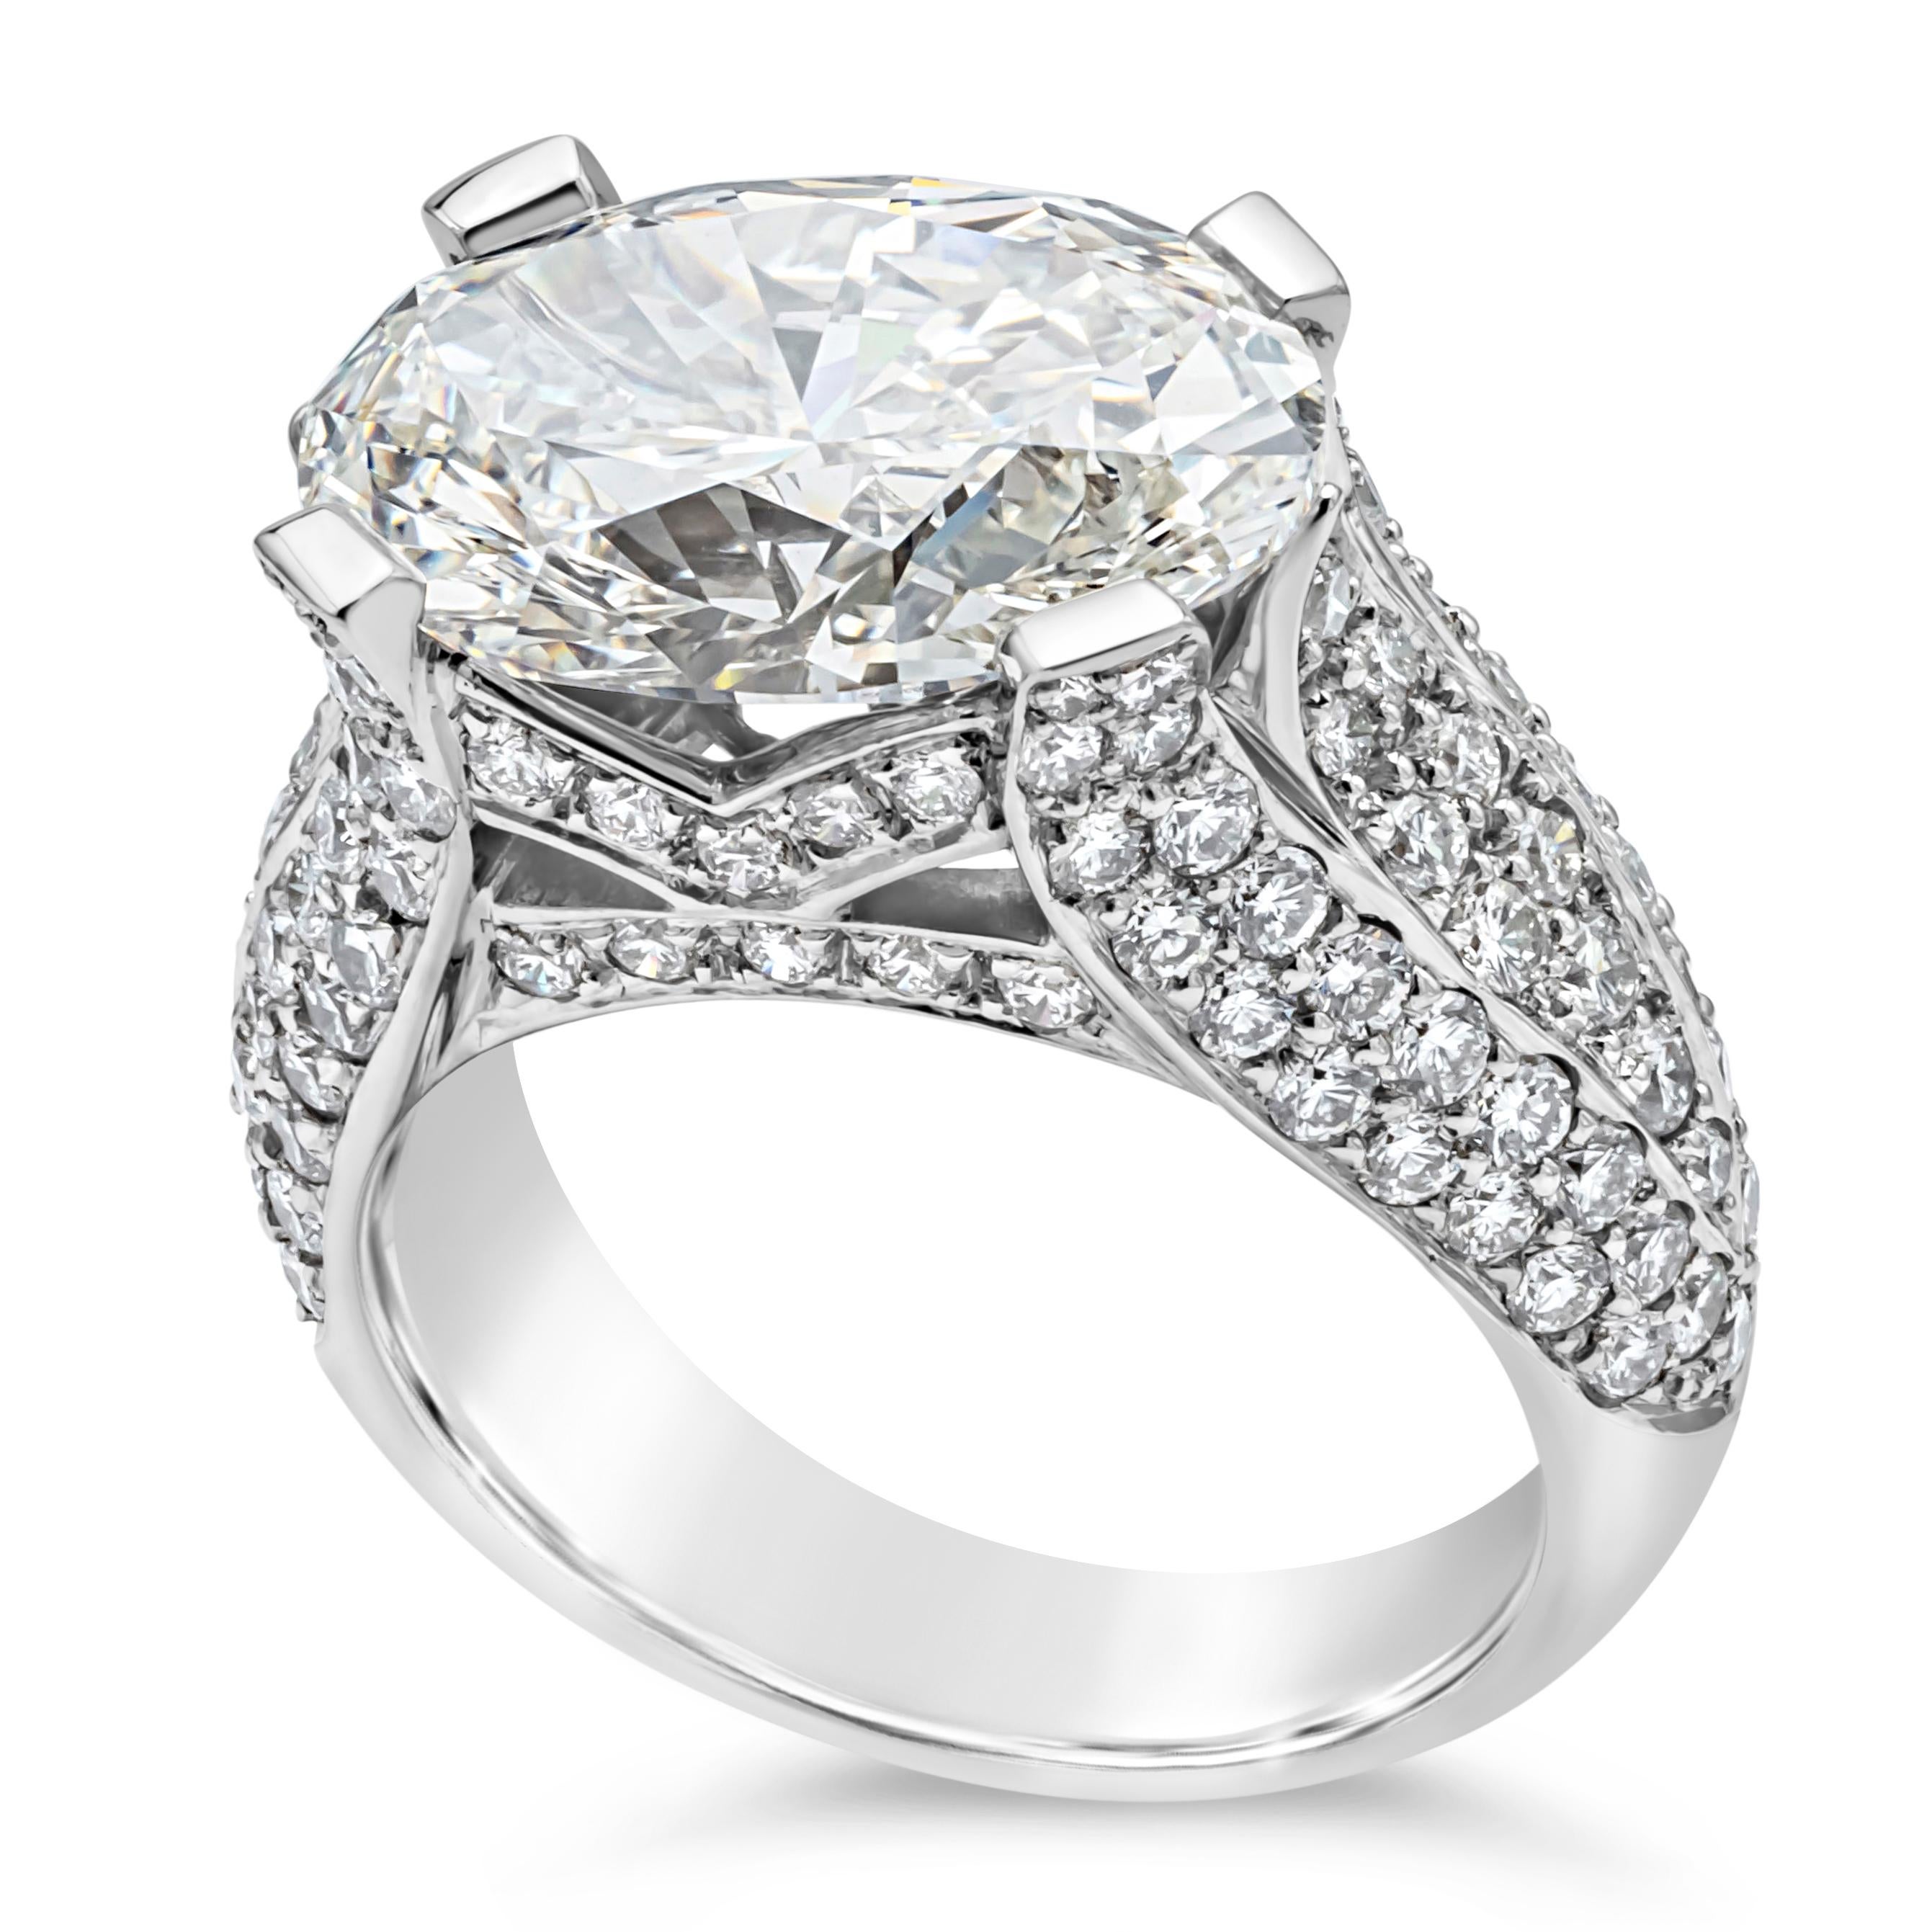 A luxurious and fashionable engagement ring showcasing a 6.16 carat oval cut diamond certified by GIA as I Color, VVS2 in Clarity, set east to west in a four prong platinum setting. Accented and embellished with micro-pave diamonds set half way down